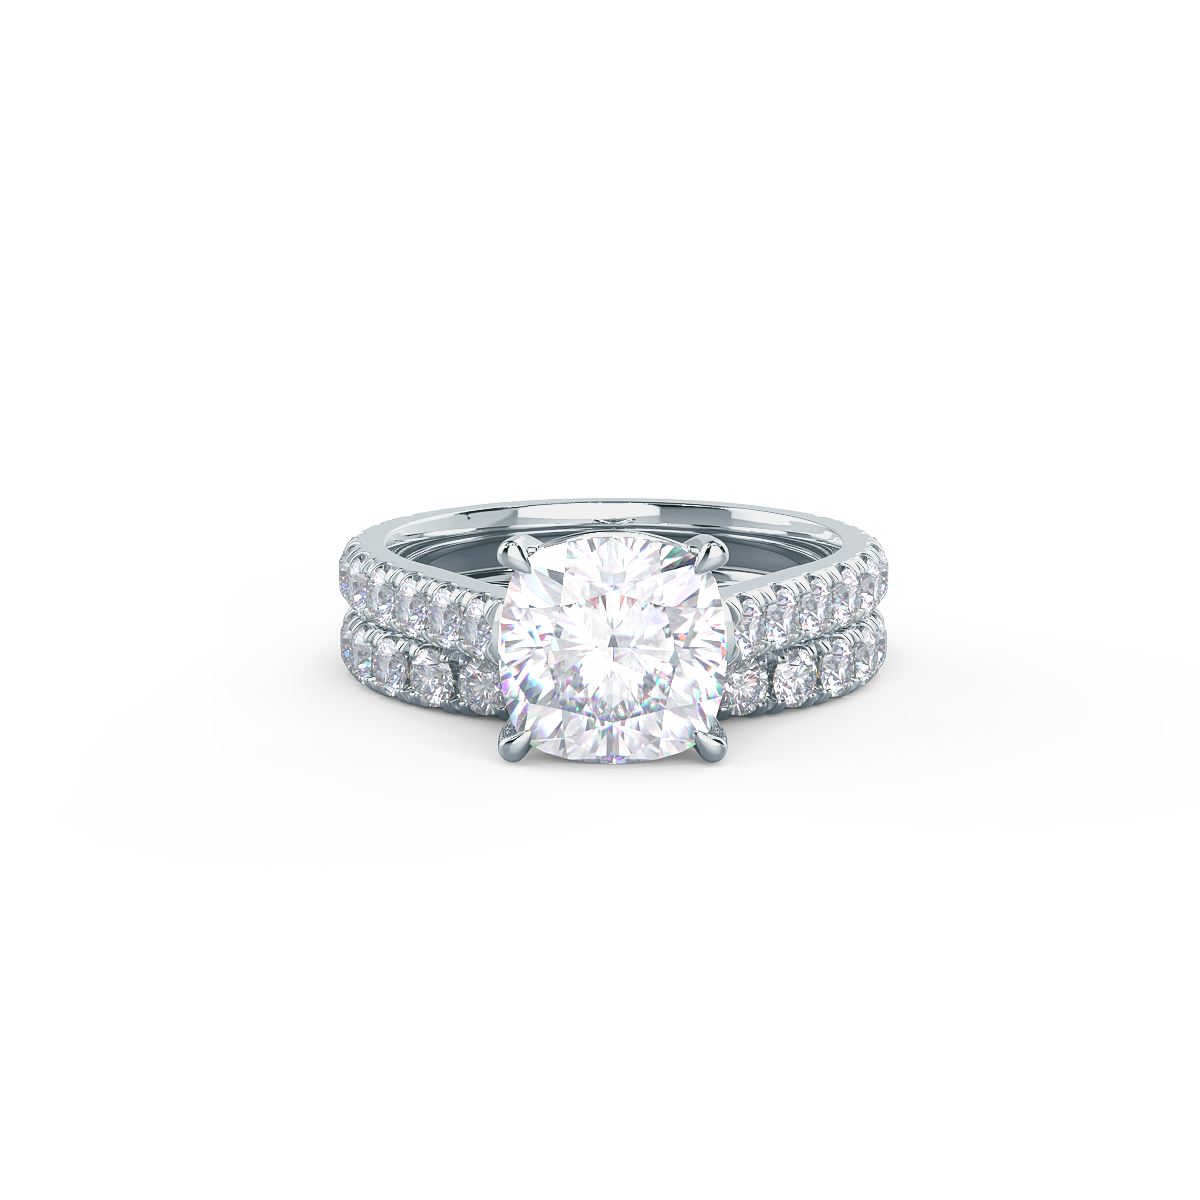  This setting allows a wedding band to sit flush with no gap.    Shop All Wedding Bands   